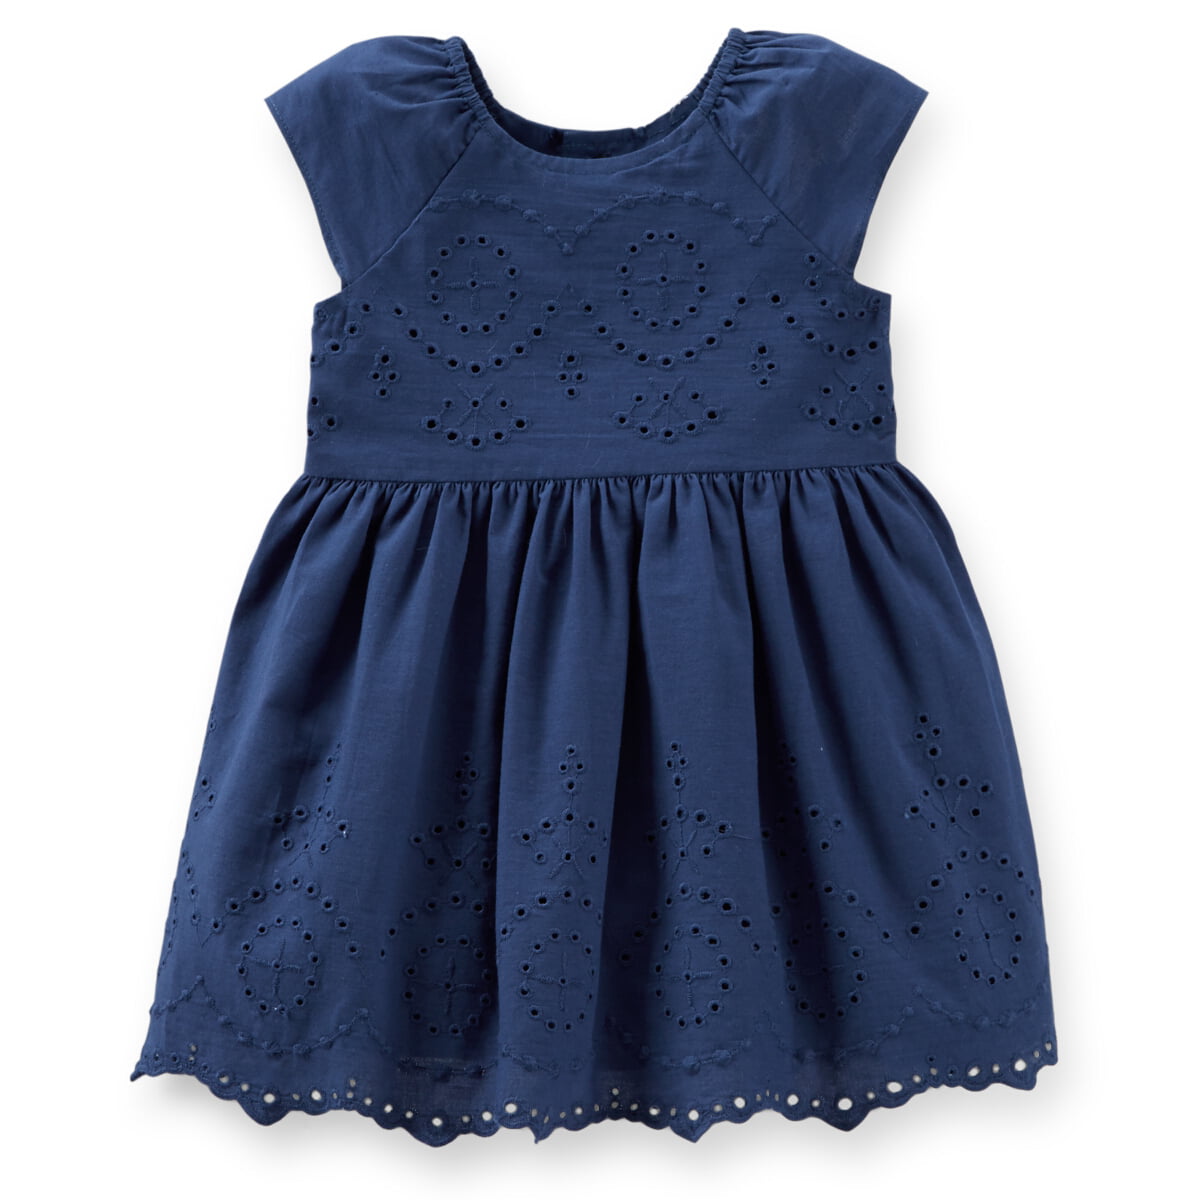 carter's easter dresses for toddlers